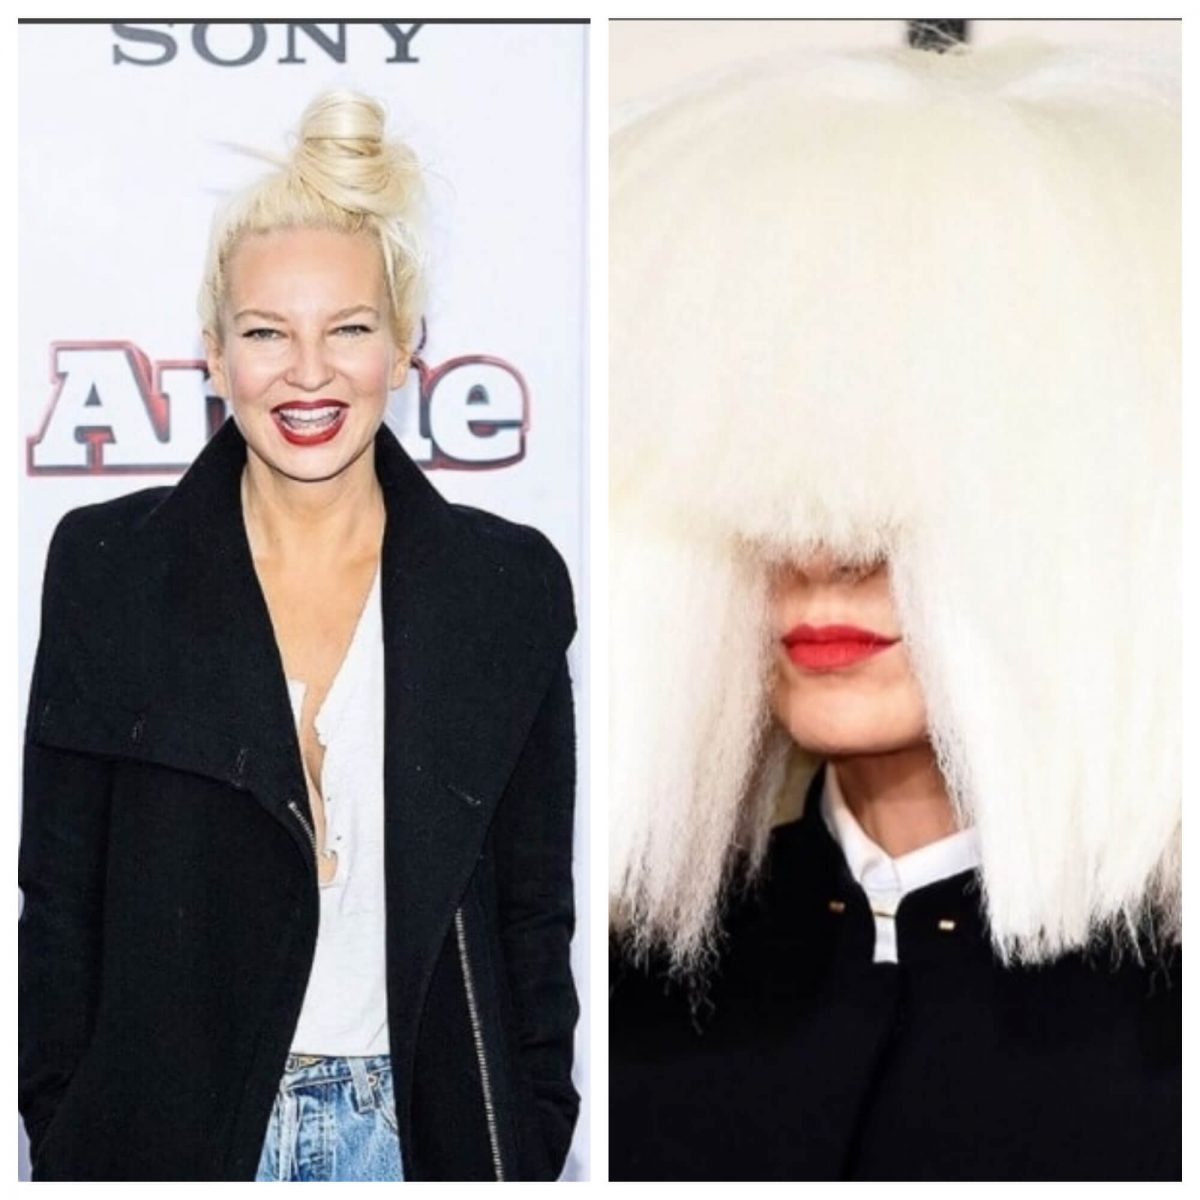 Sia Furler gives a sassy response to paparazzi selling her nude photos.